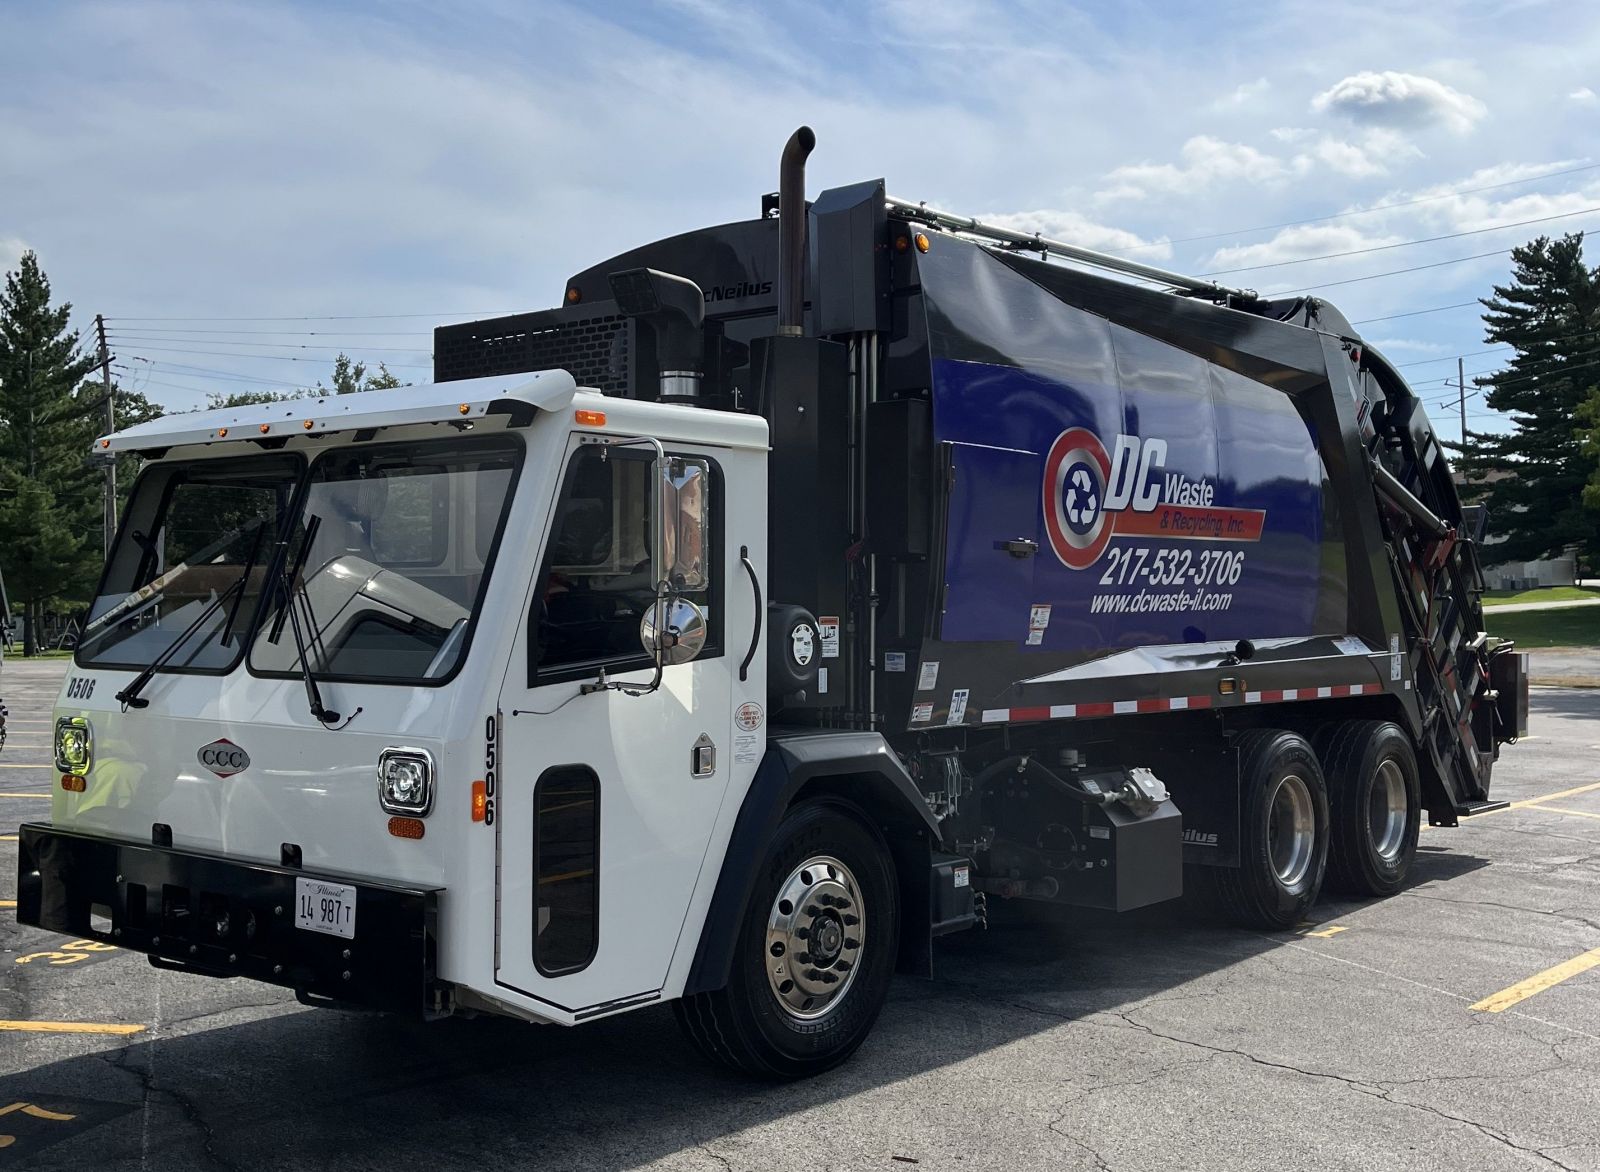 DC Waste offers commercial and residential dumpster services